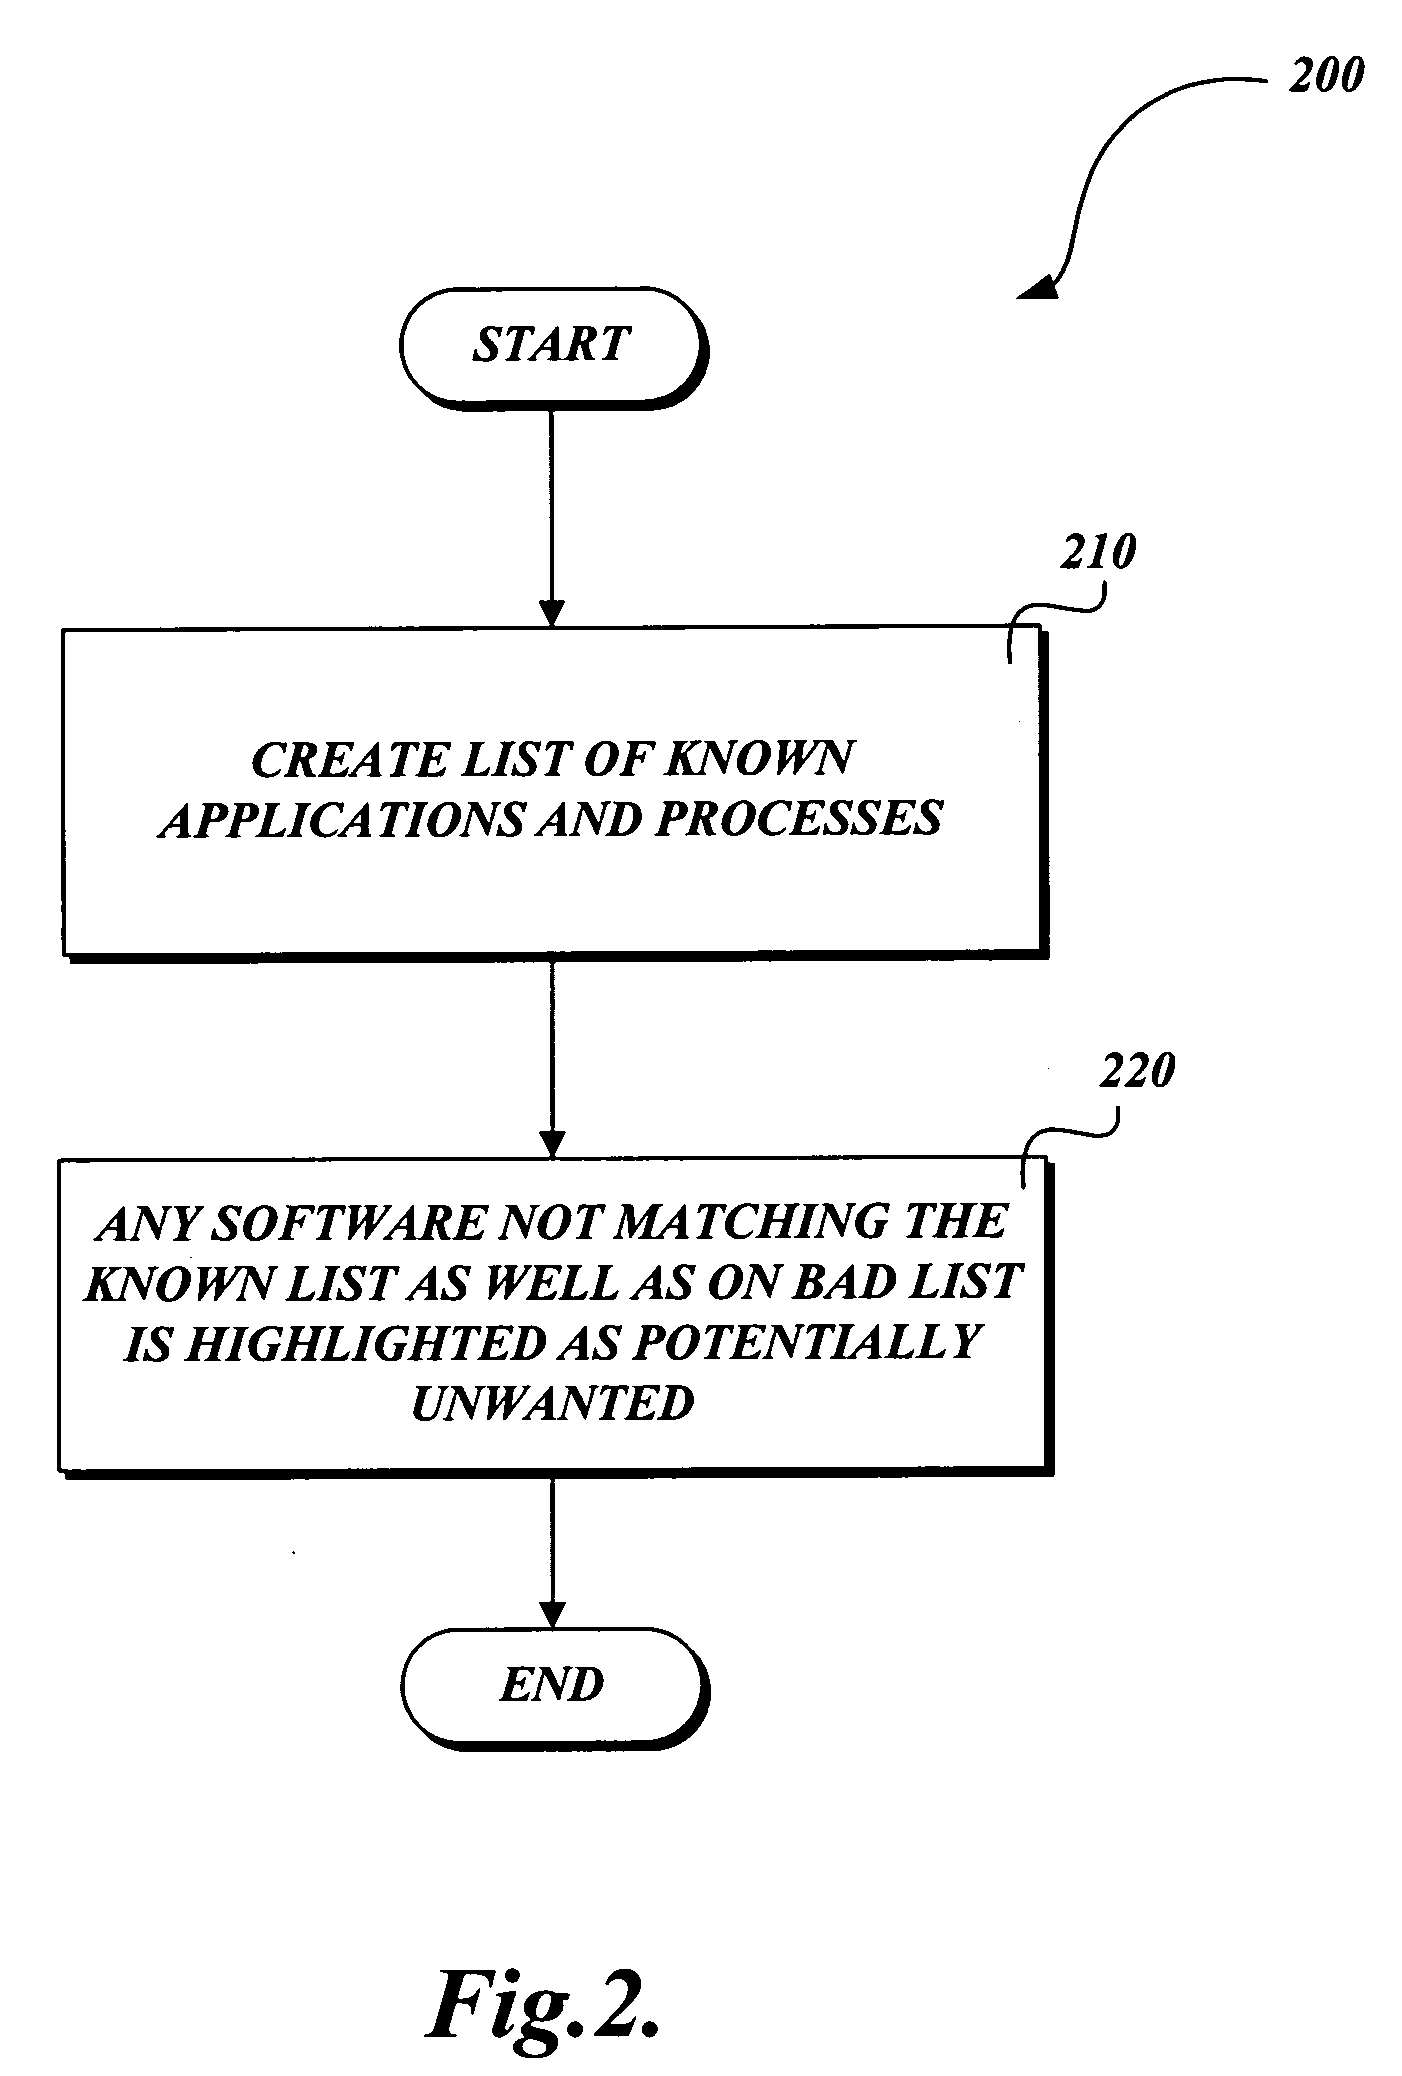 System and method for identifying and removing potentially unwanted software